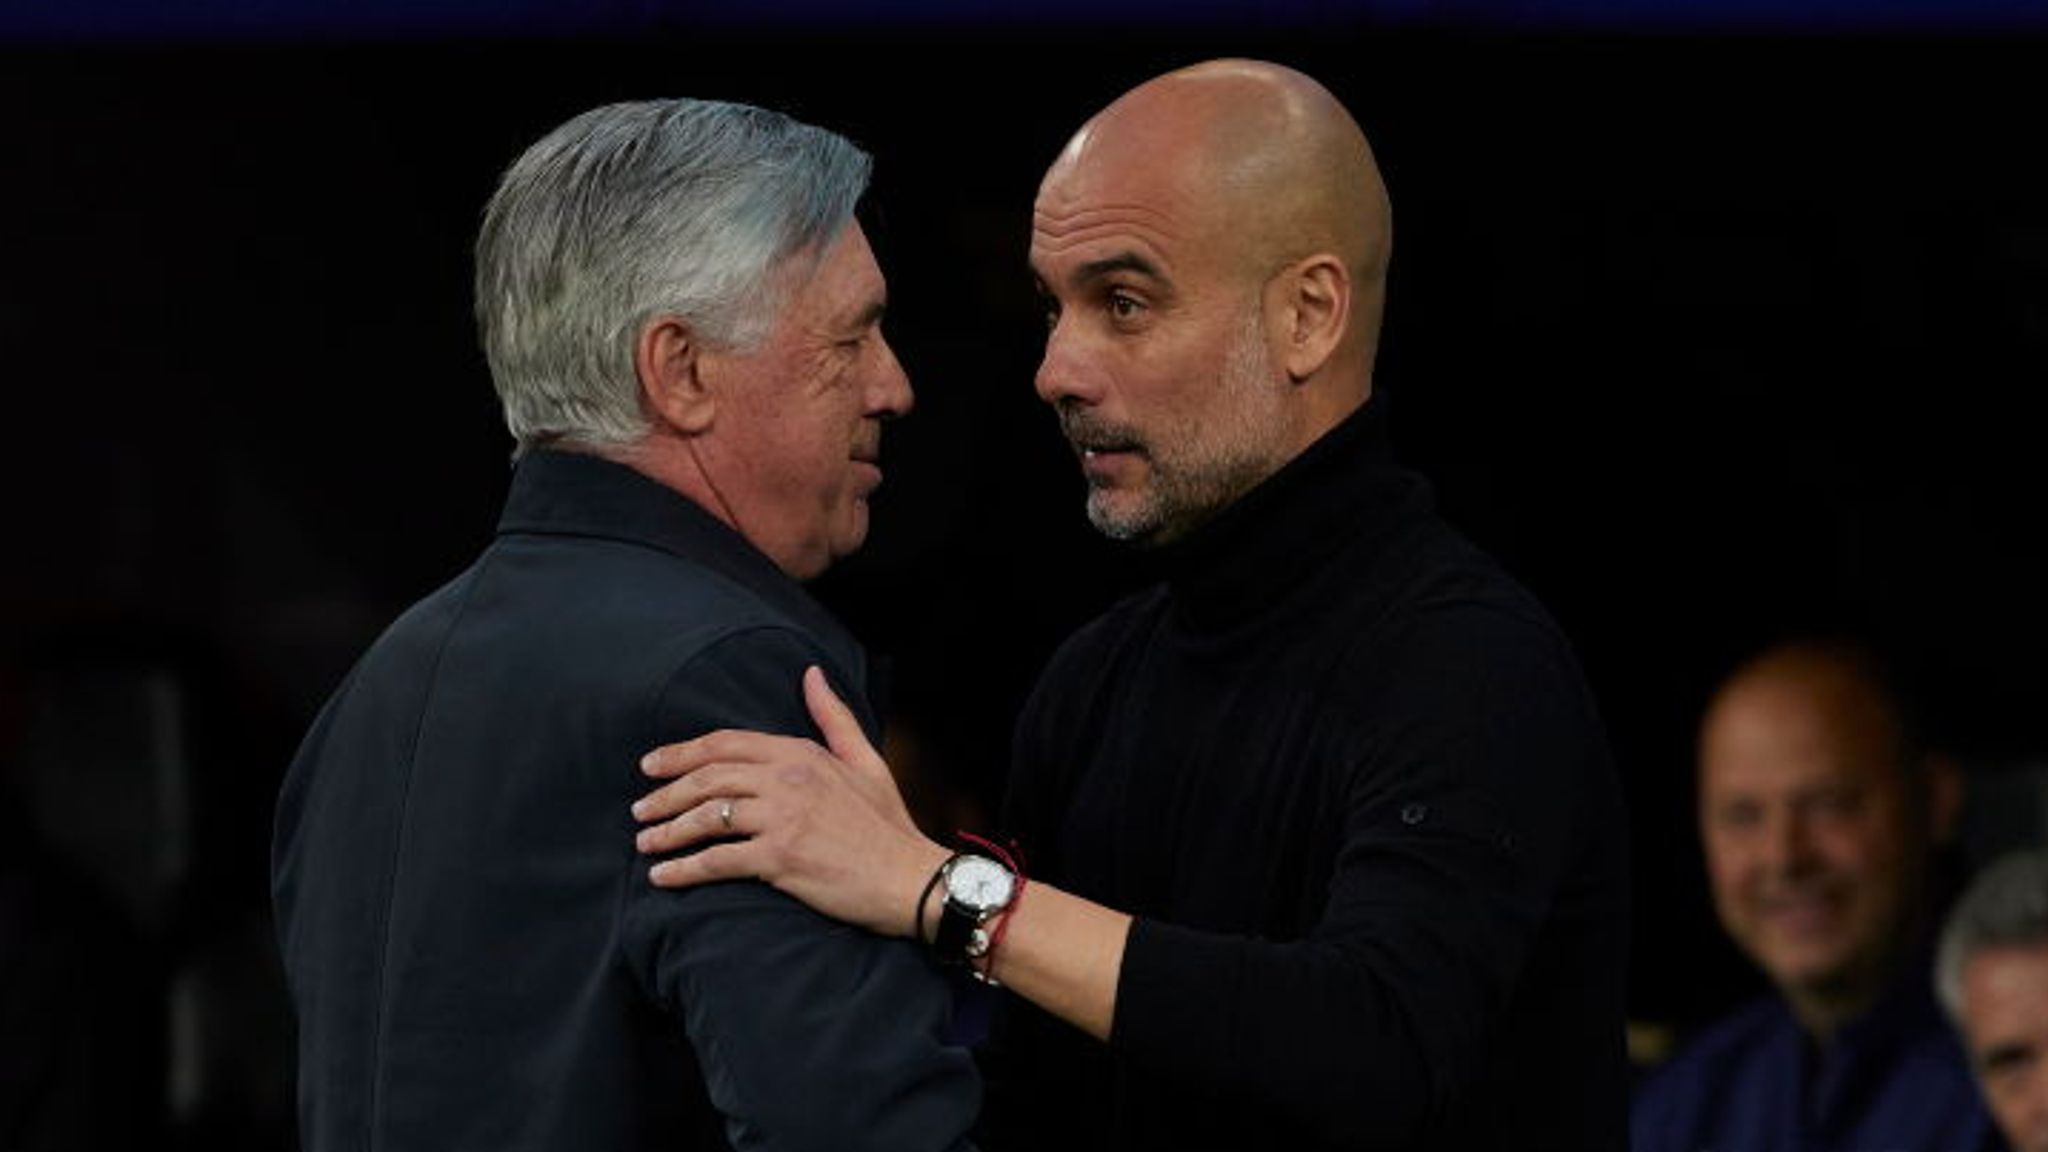 Carlo Ancelotti's Real Madrid vs Pep Guardiola's Man City: Two coaching  greats could not be more different | Football News | Sky Sports